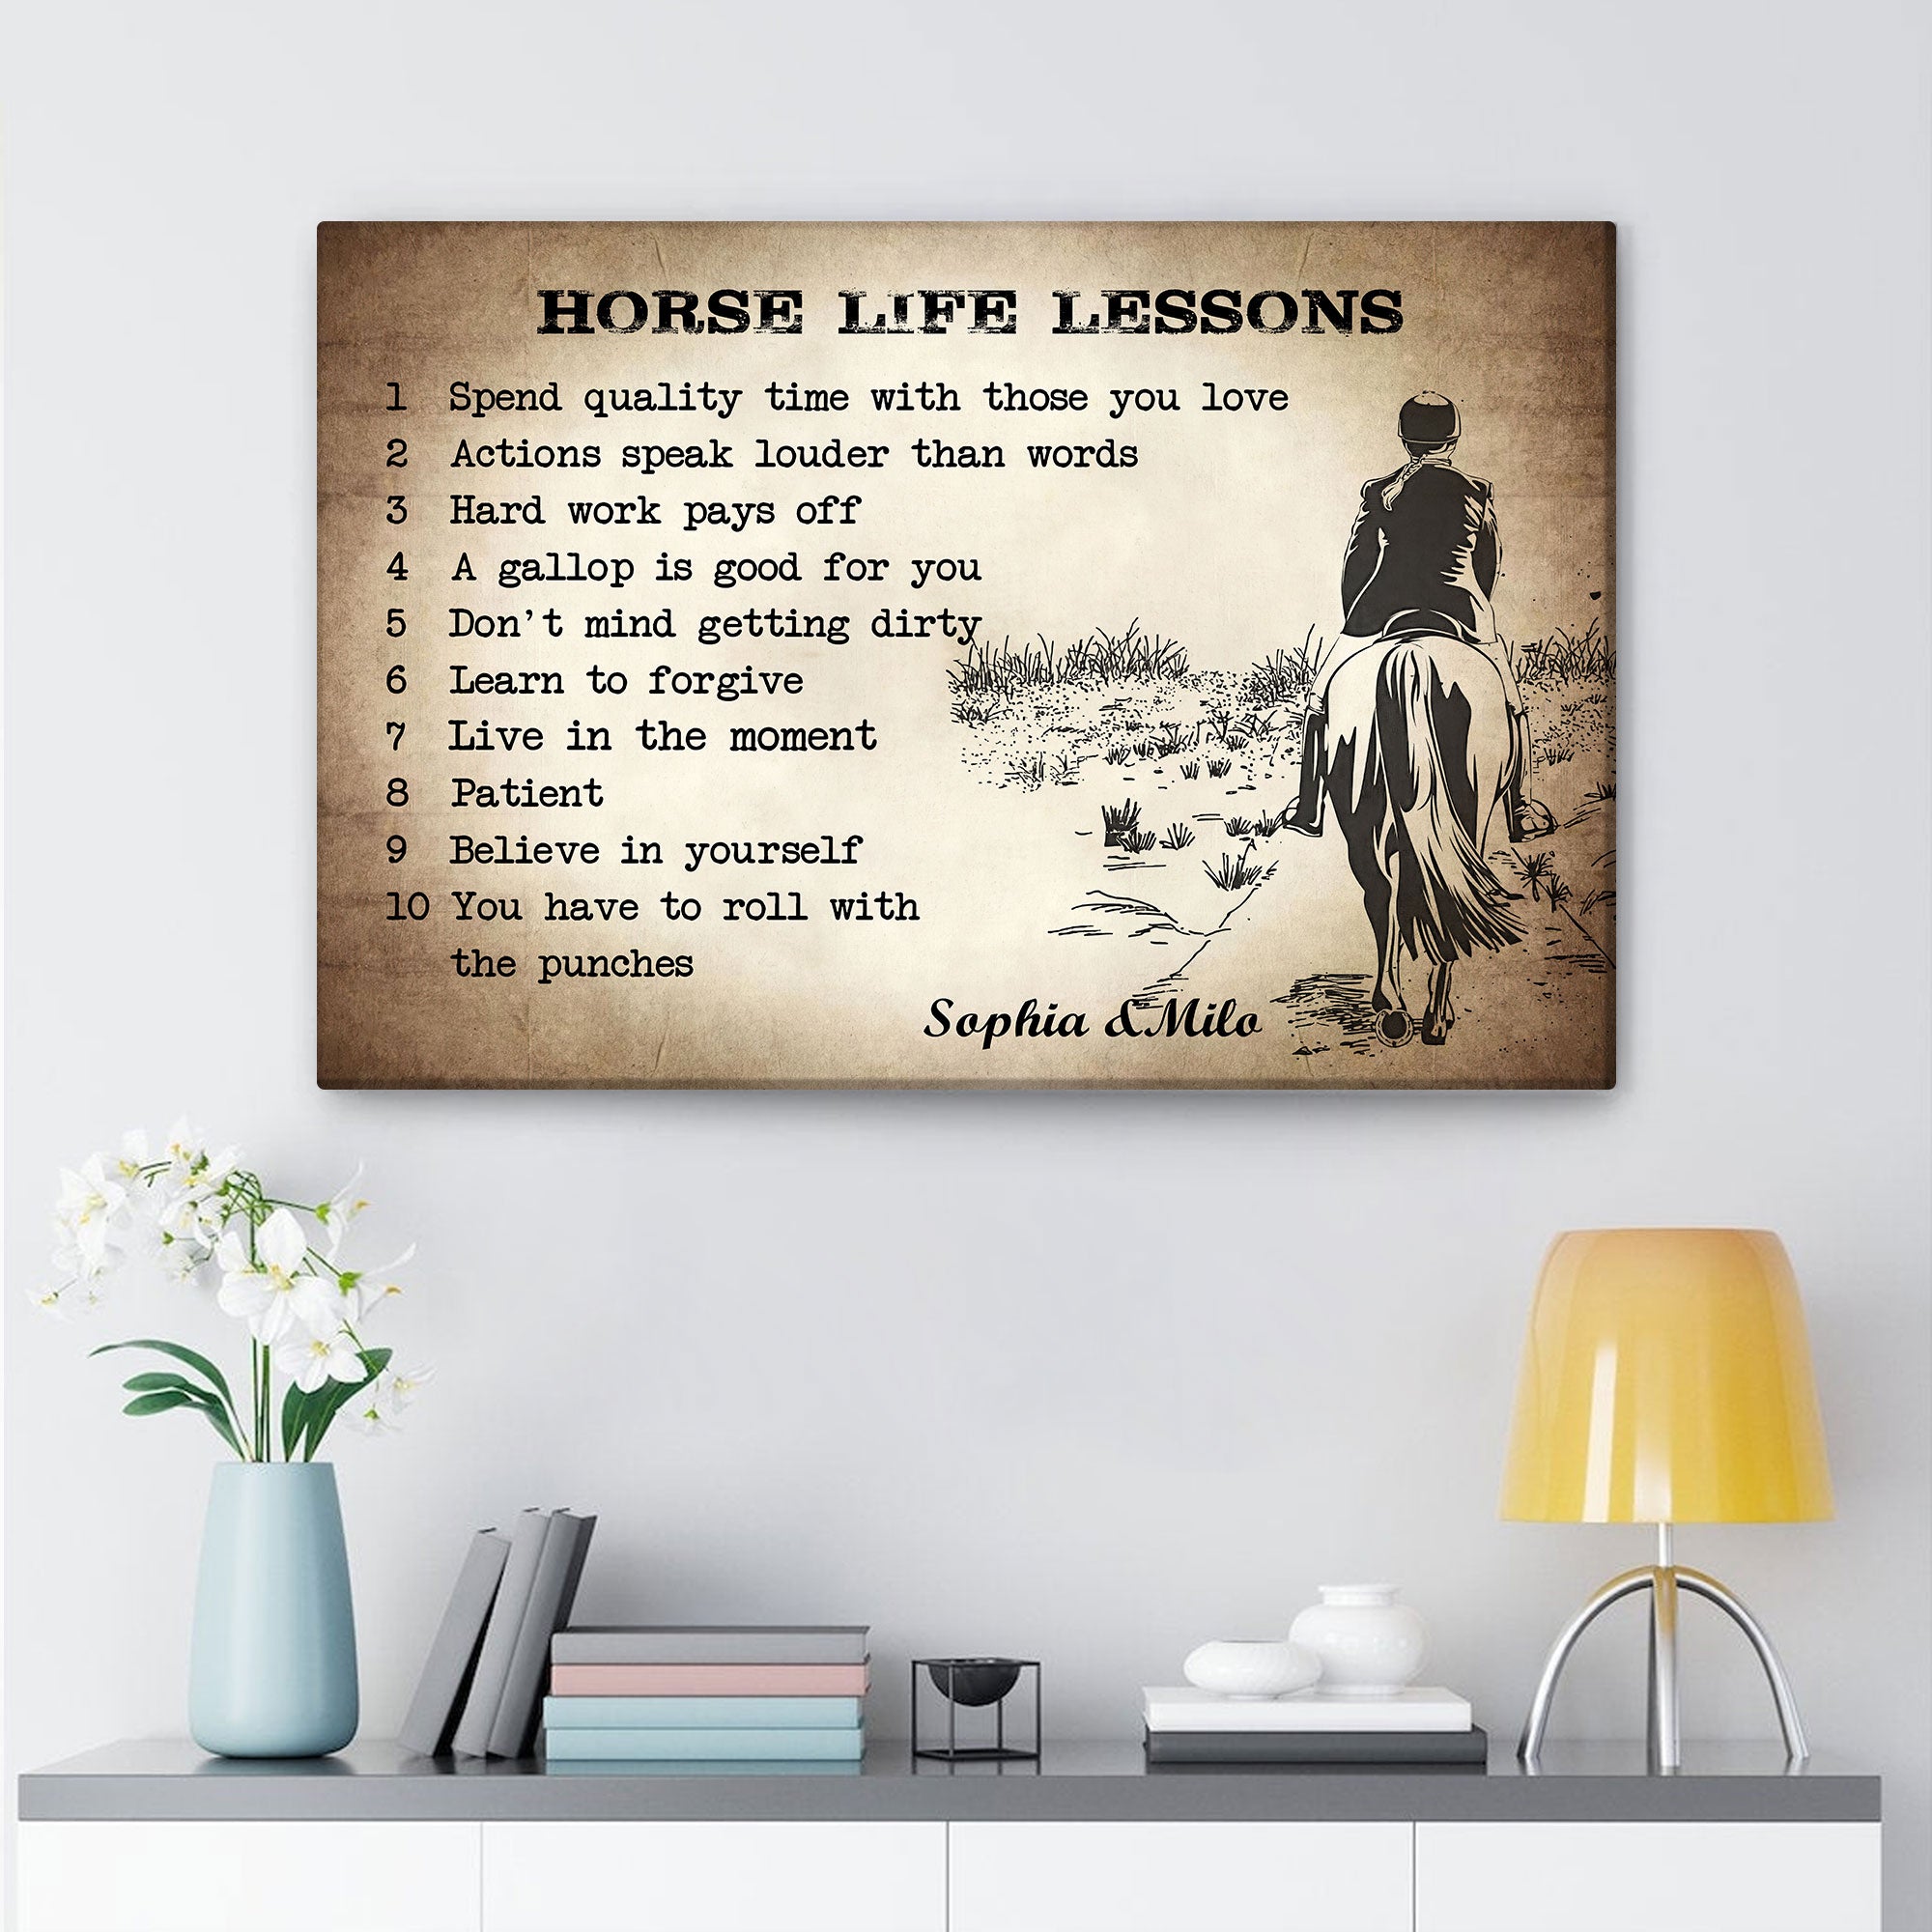 Personalized Horse Poster & Canvas, Horse Life Lessons